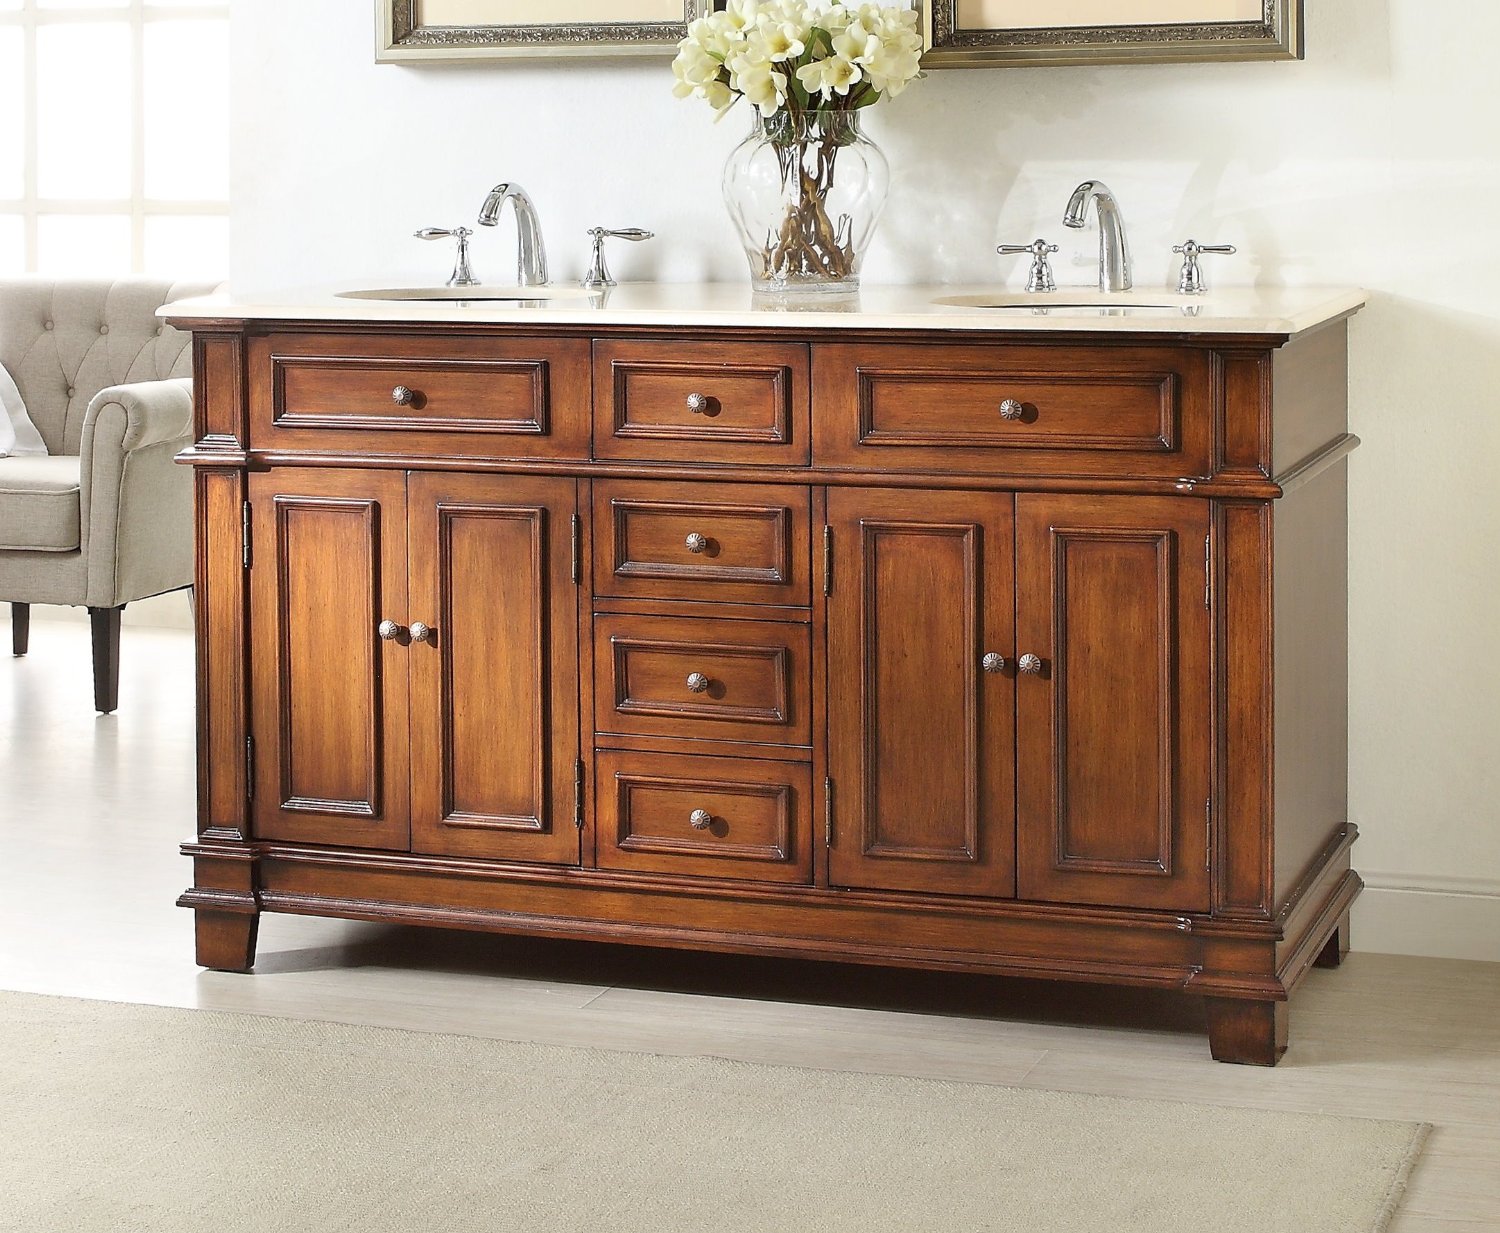 Mission Double Sink Bathroom Vanity, What Size Mirrors For 60 Inch Double Sink Vanity Units